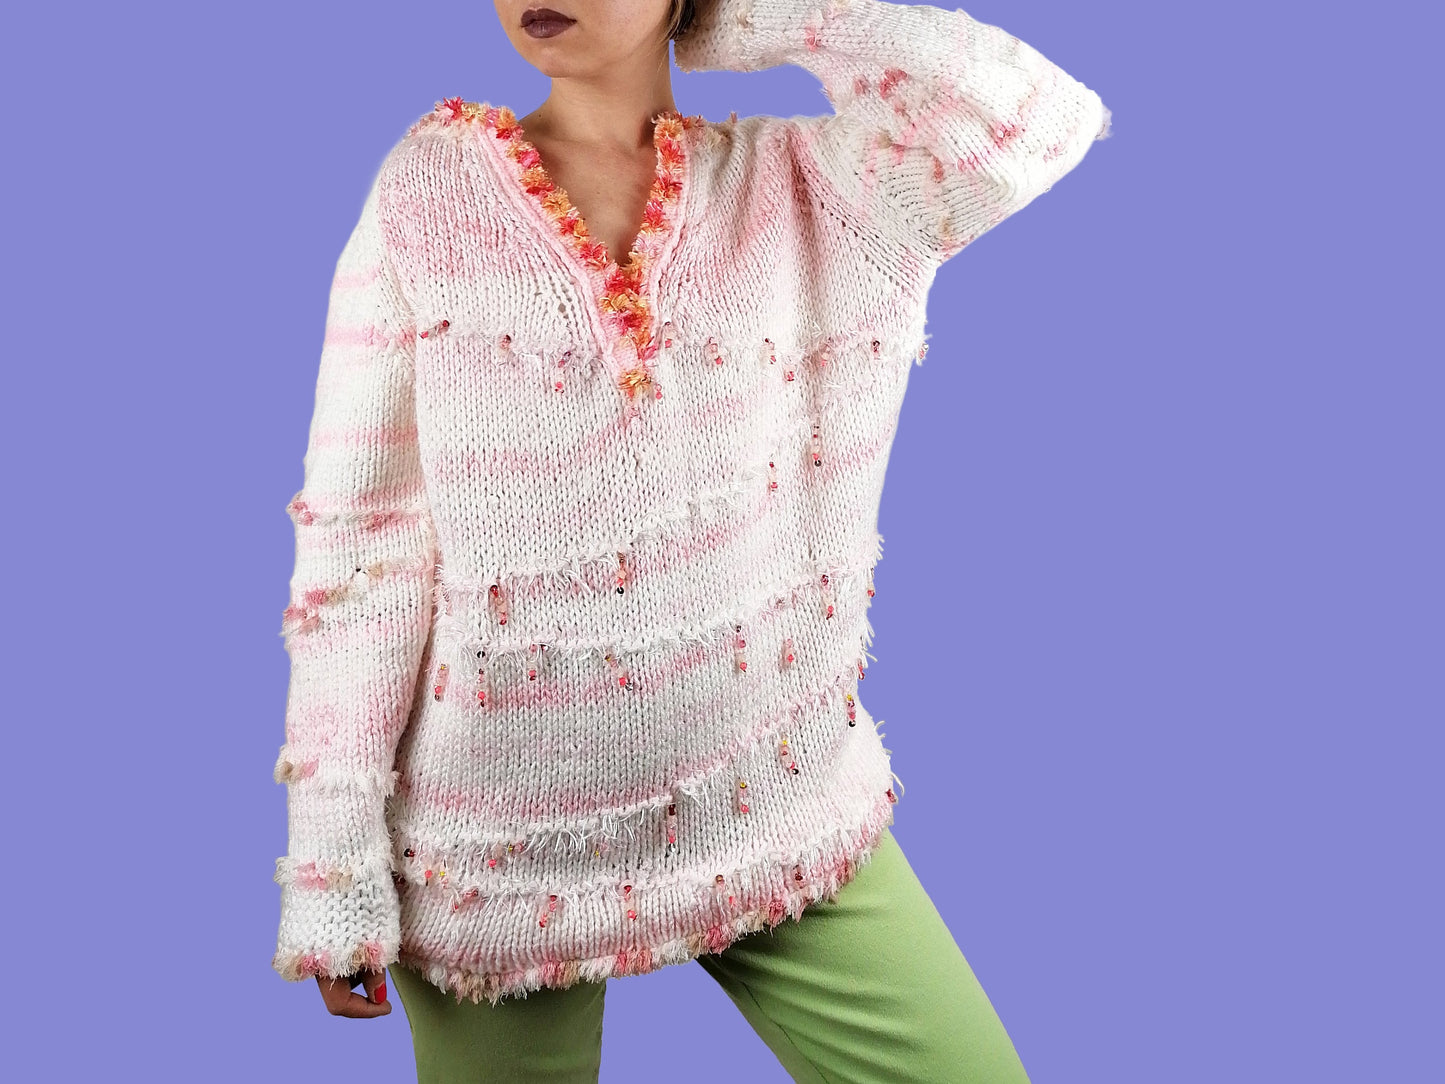 Handmade Fluffy Cotton Candy Sweater - size M-L